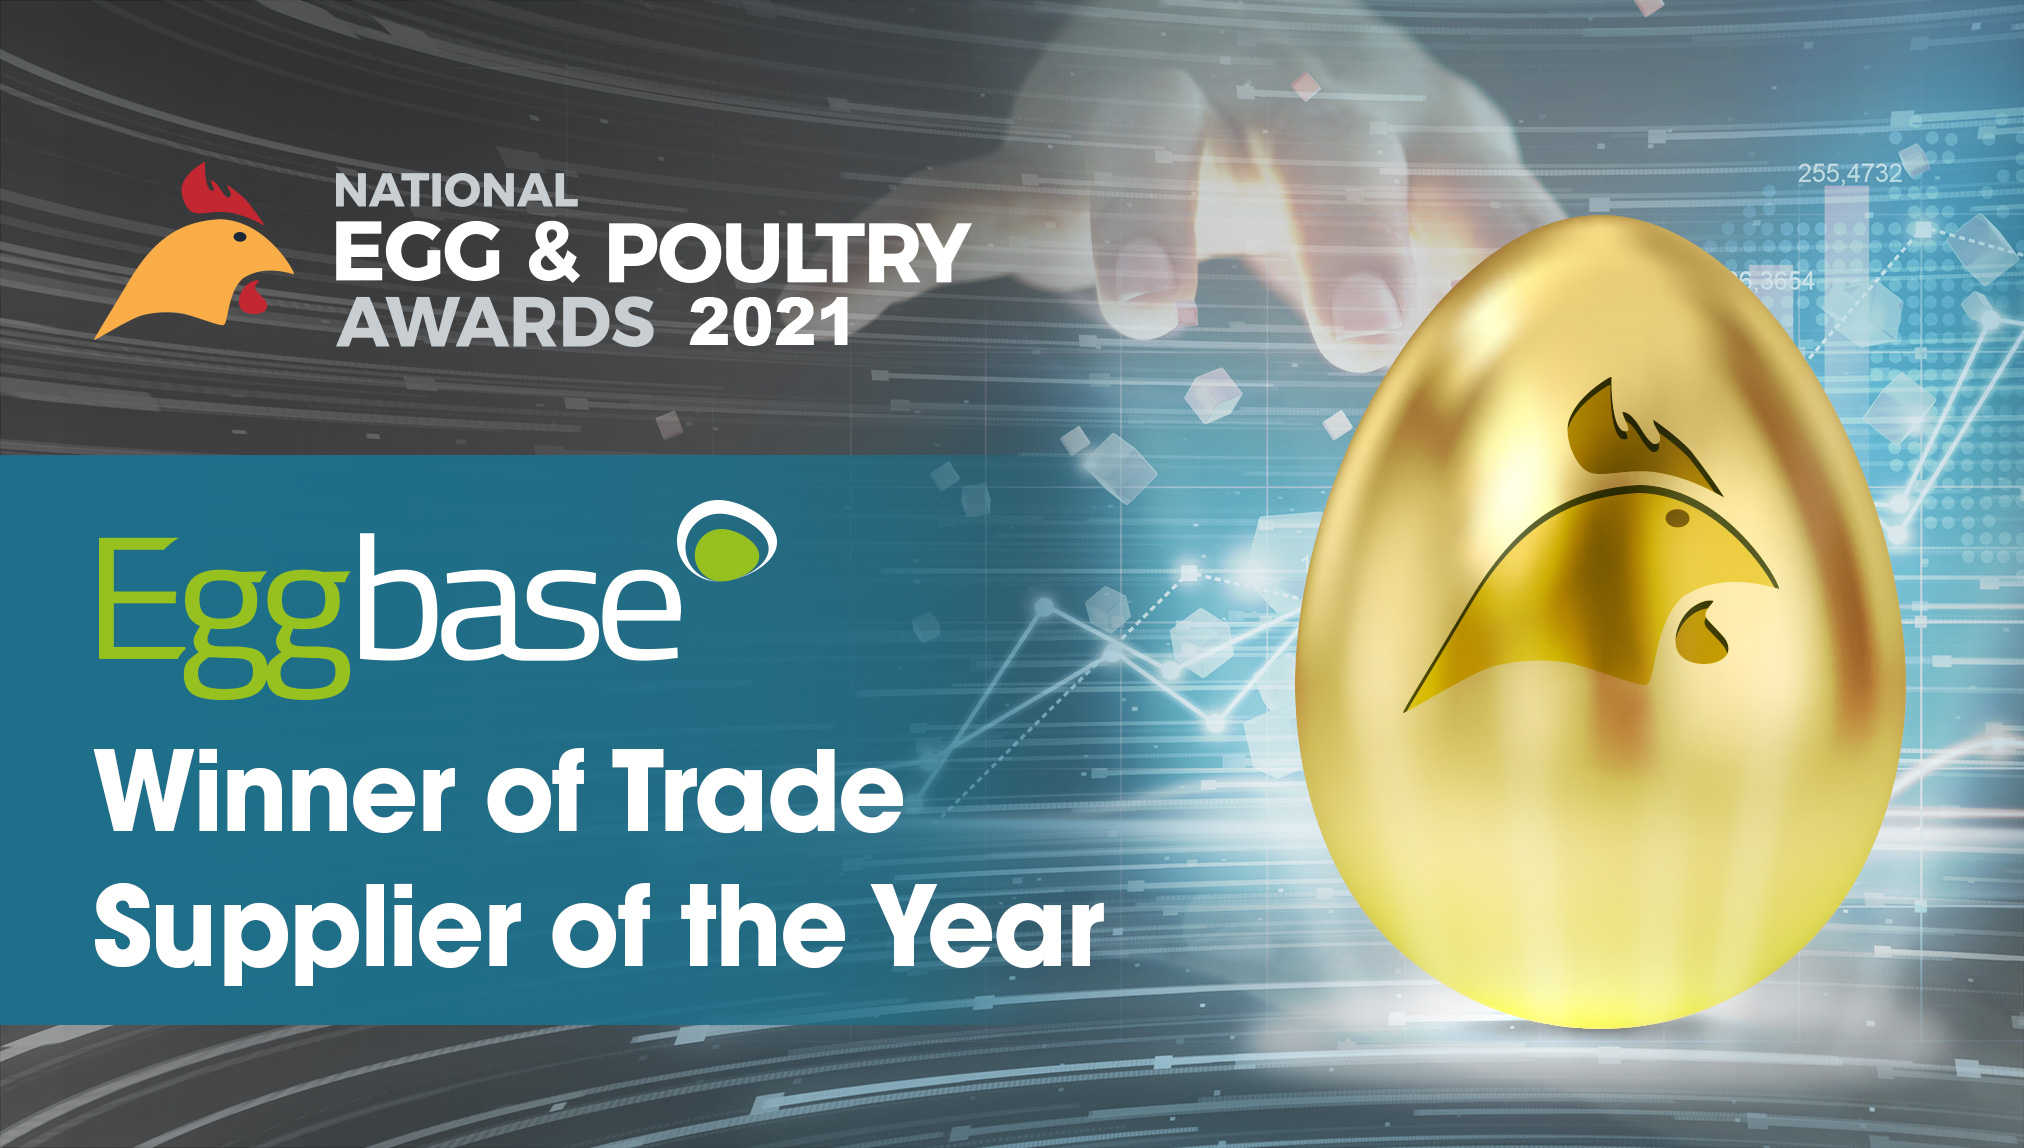 The Results of the National Egg & Poultry Awards 2021 Are In!